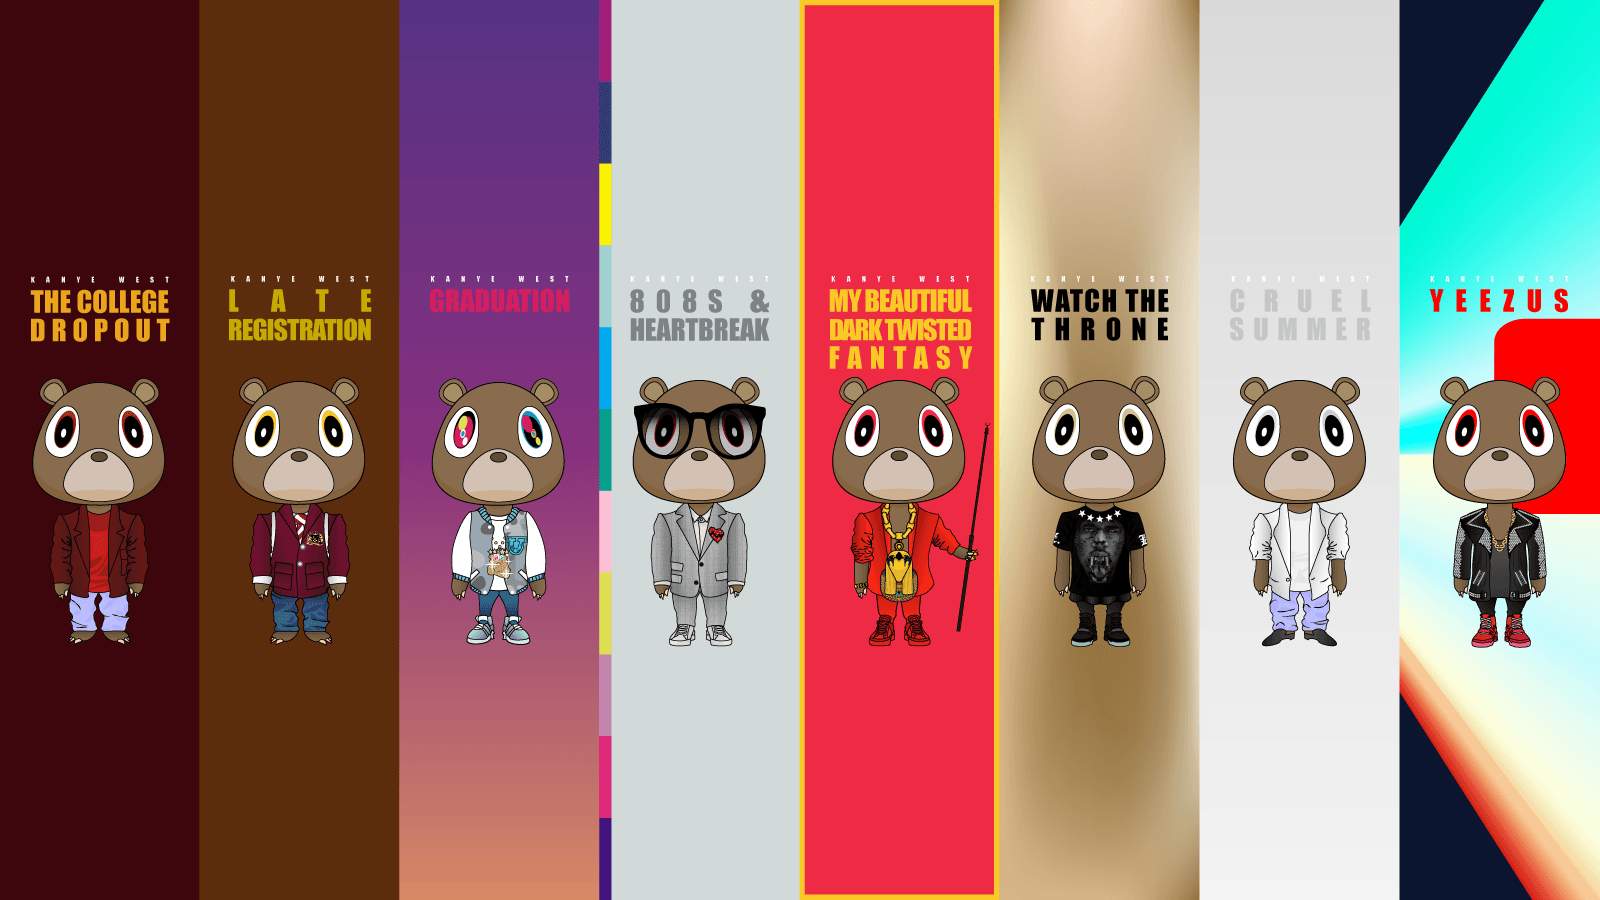 Travis Scott  Young Thug x Kanye West Graduation Album Cover by Jack  Colchester on Dribbble